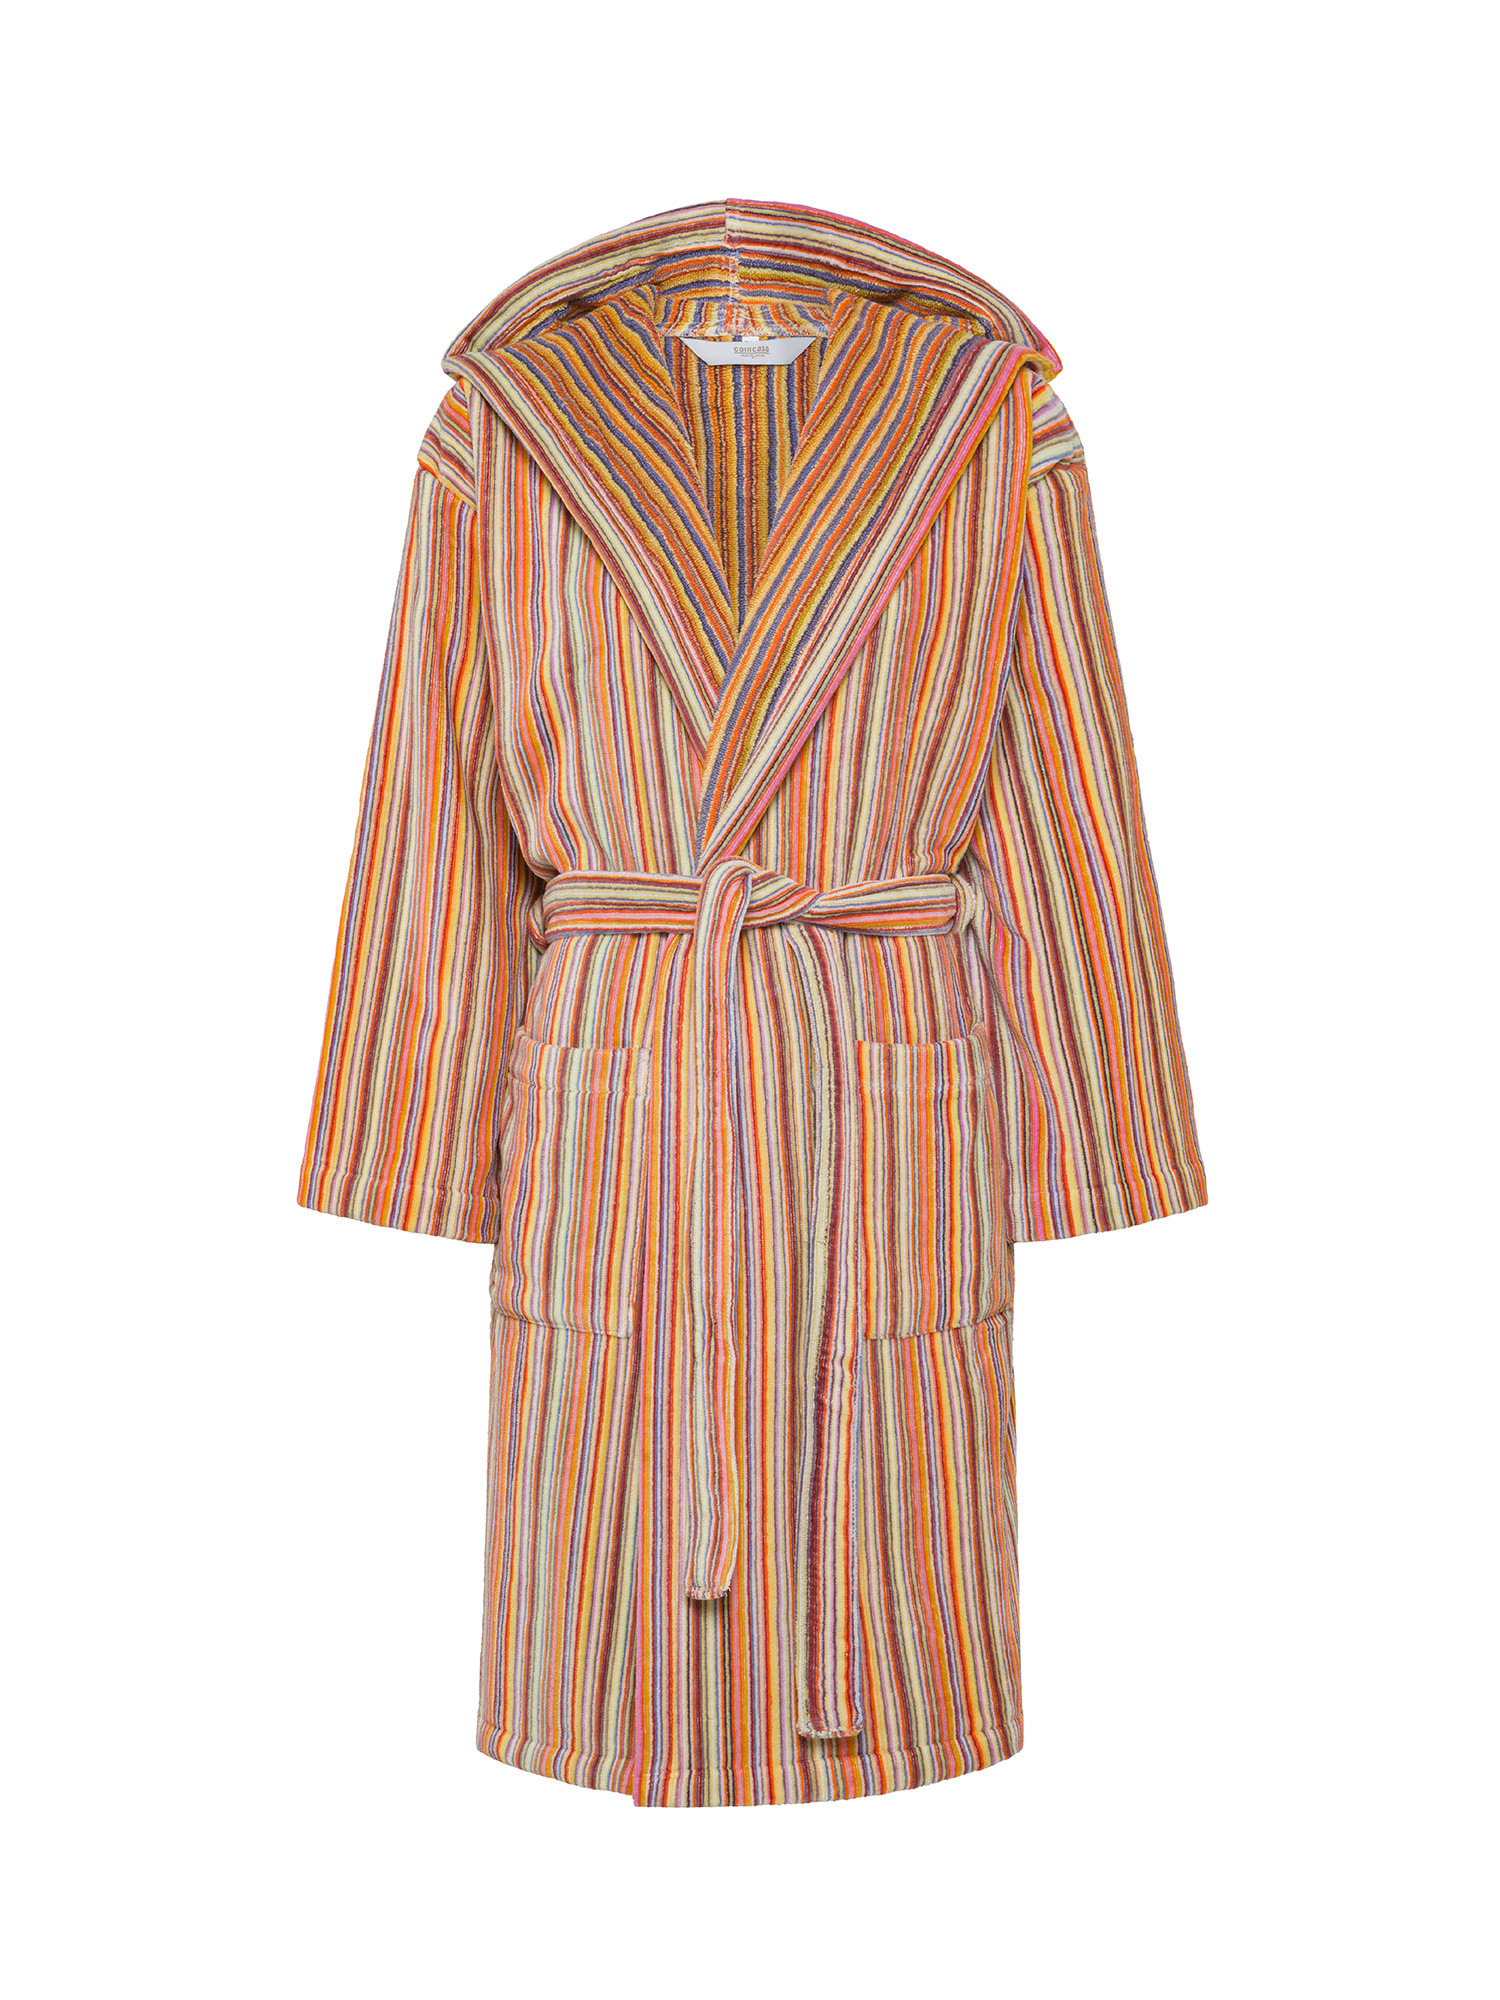 Velor cotton bathrobe with striped pattern, Multicolor, large image number 0